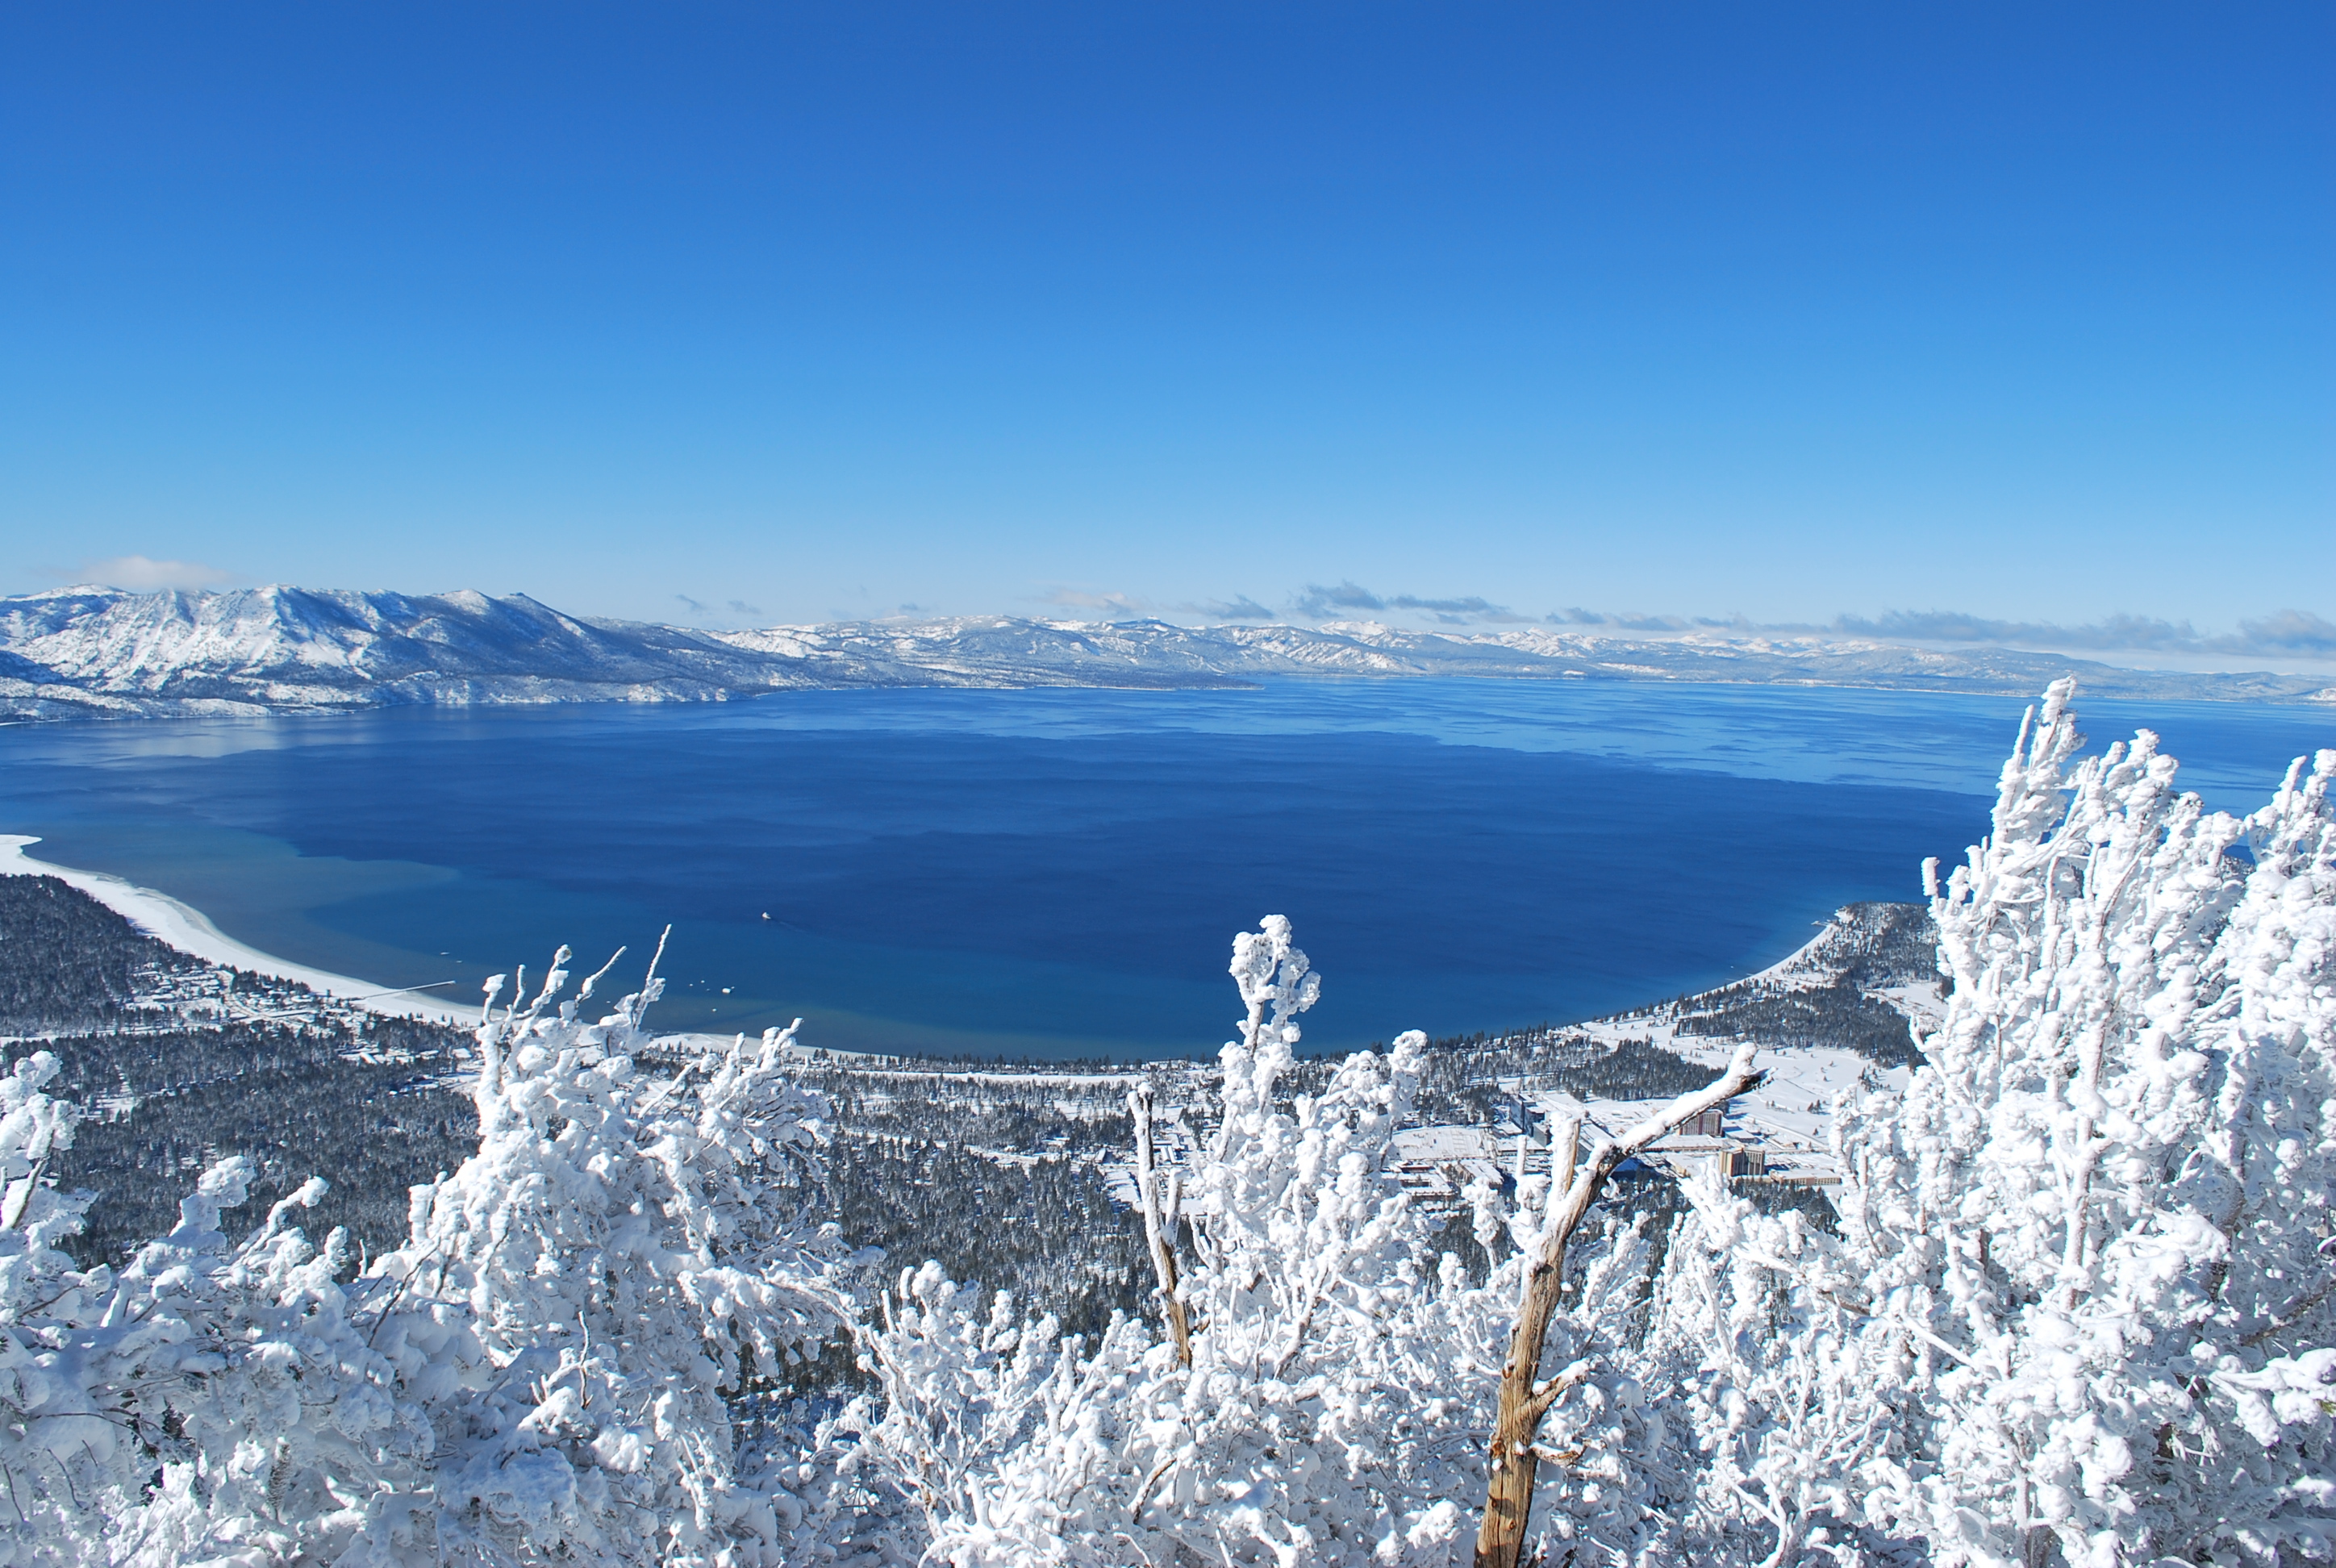 Lake Tahoe offers dramatic winter scenery for The Landing guests (photo courtesy of The Landing Resort & Spa)